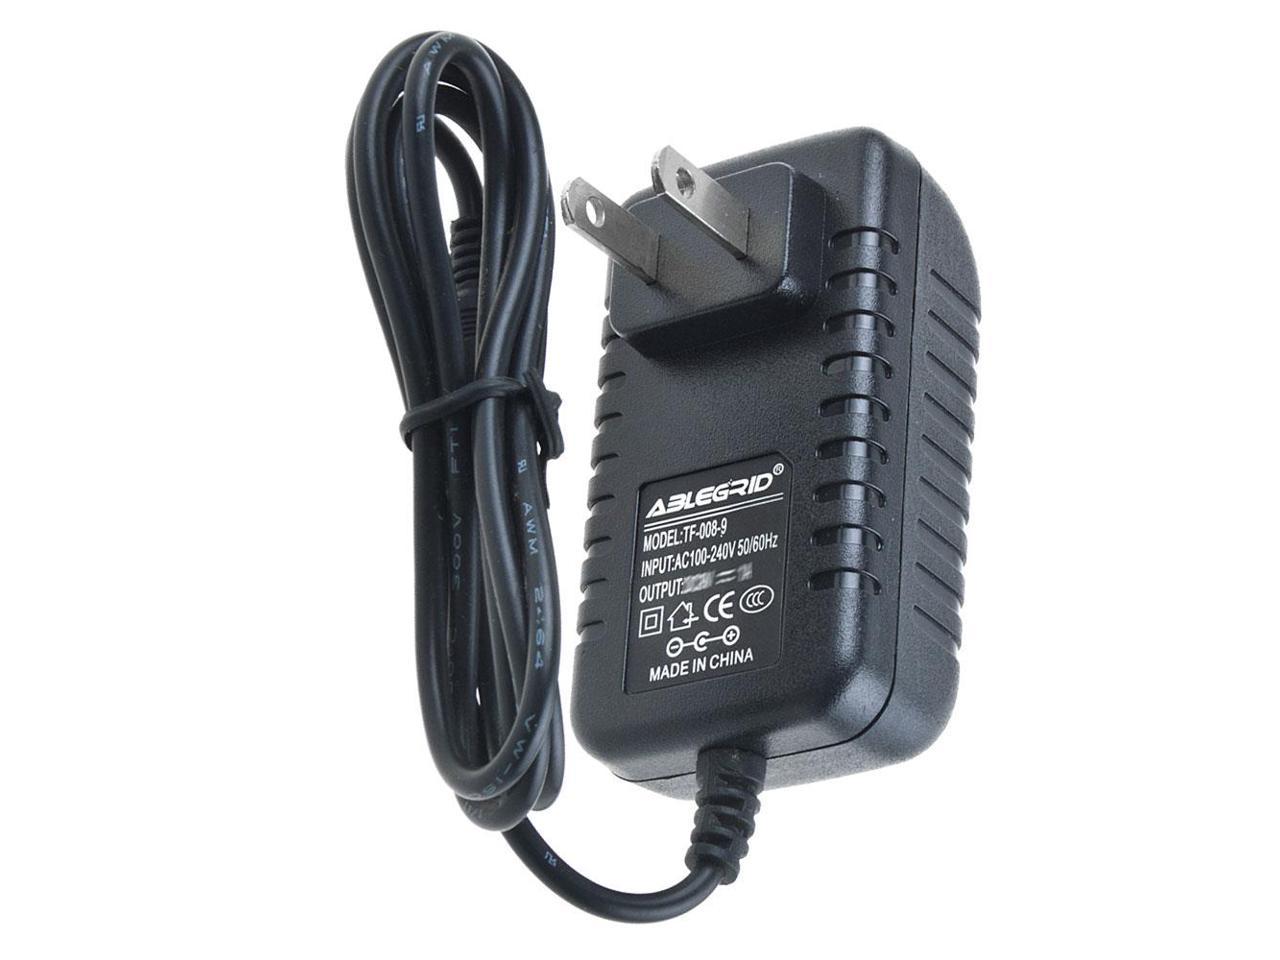 AC-DC Adapter For Thompson RCA-T-T006 TT006 15V DC Power Supply Cord Charger PSU 